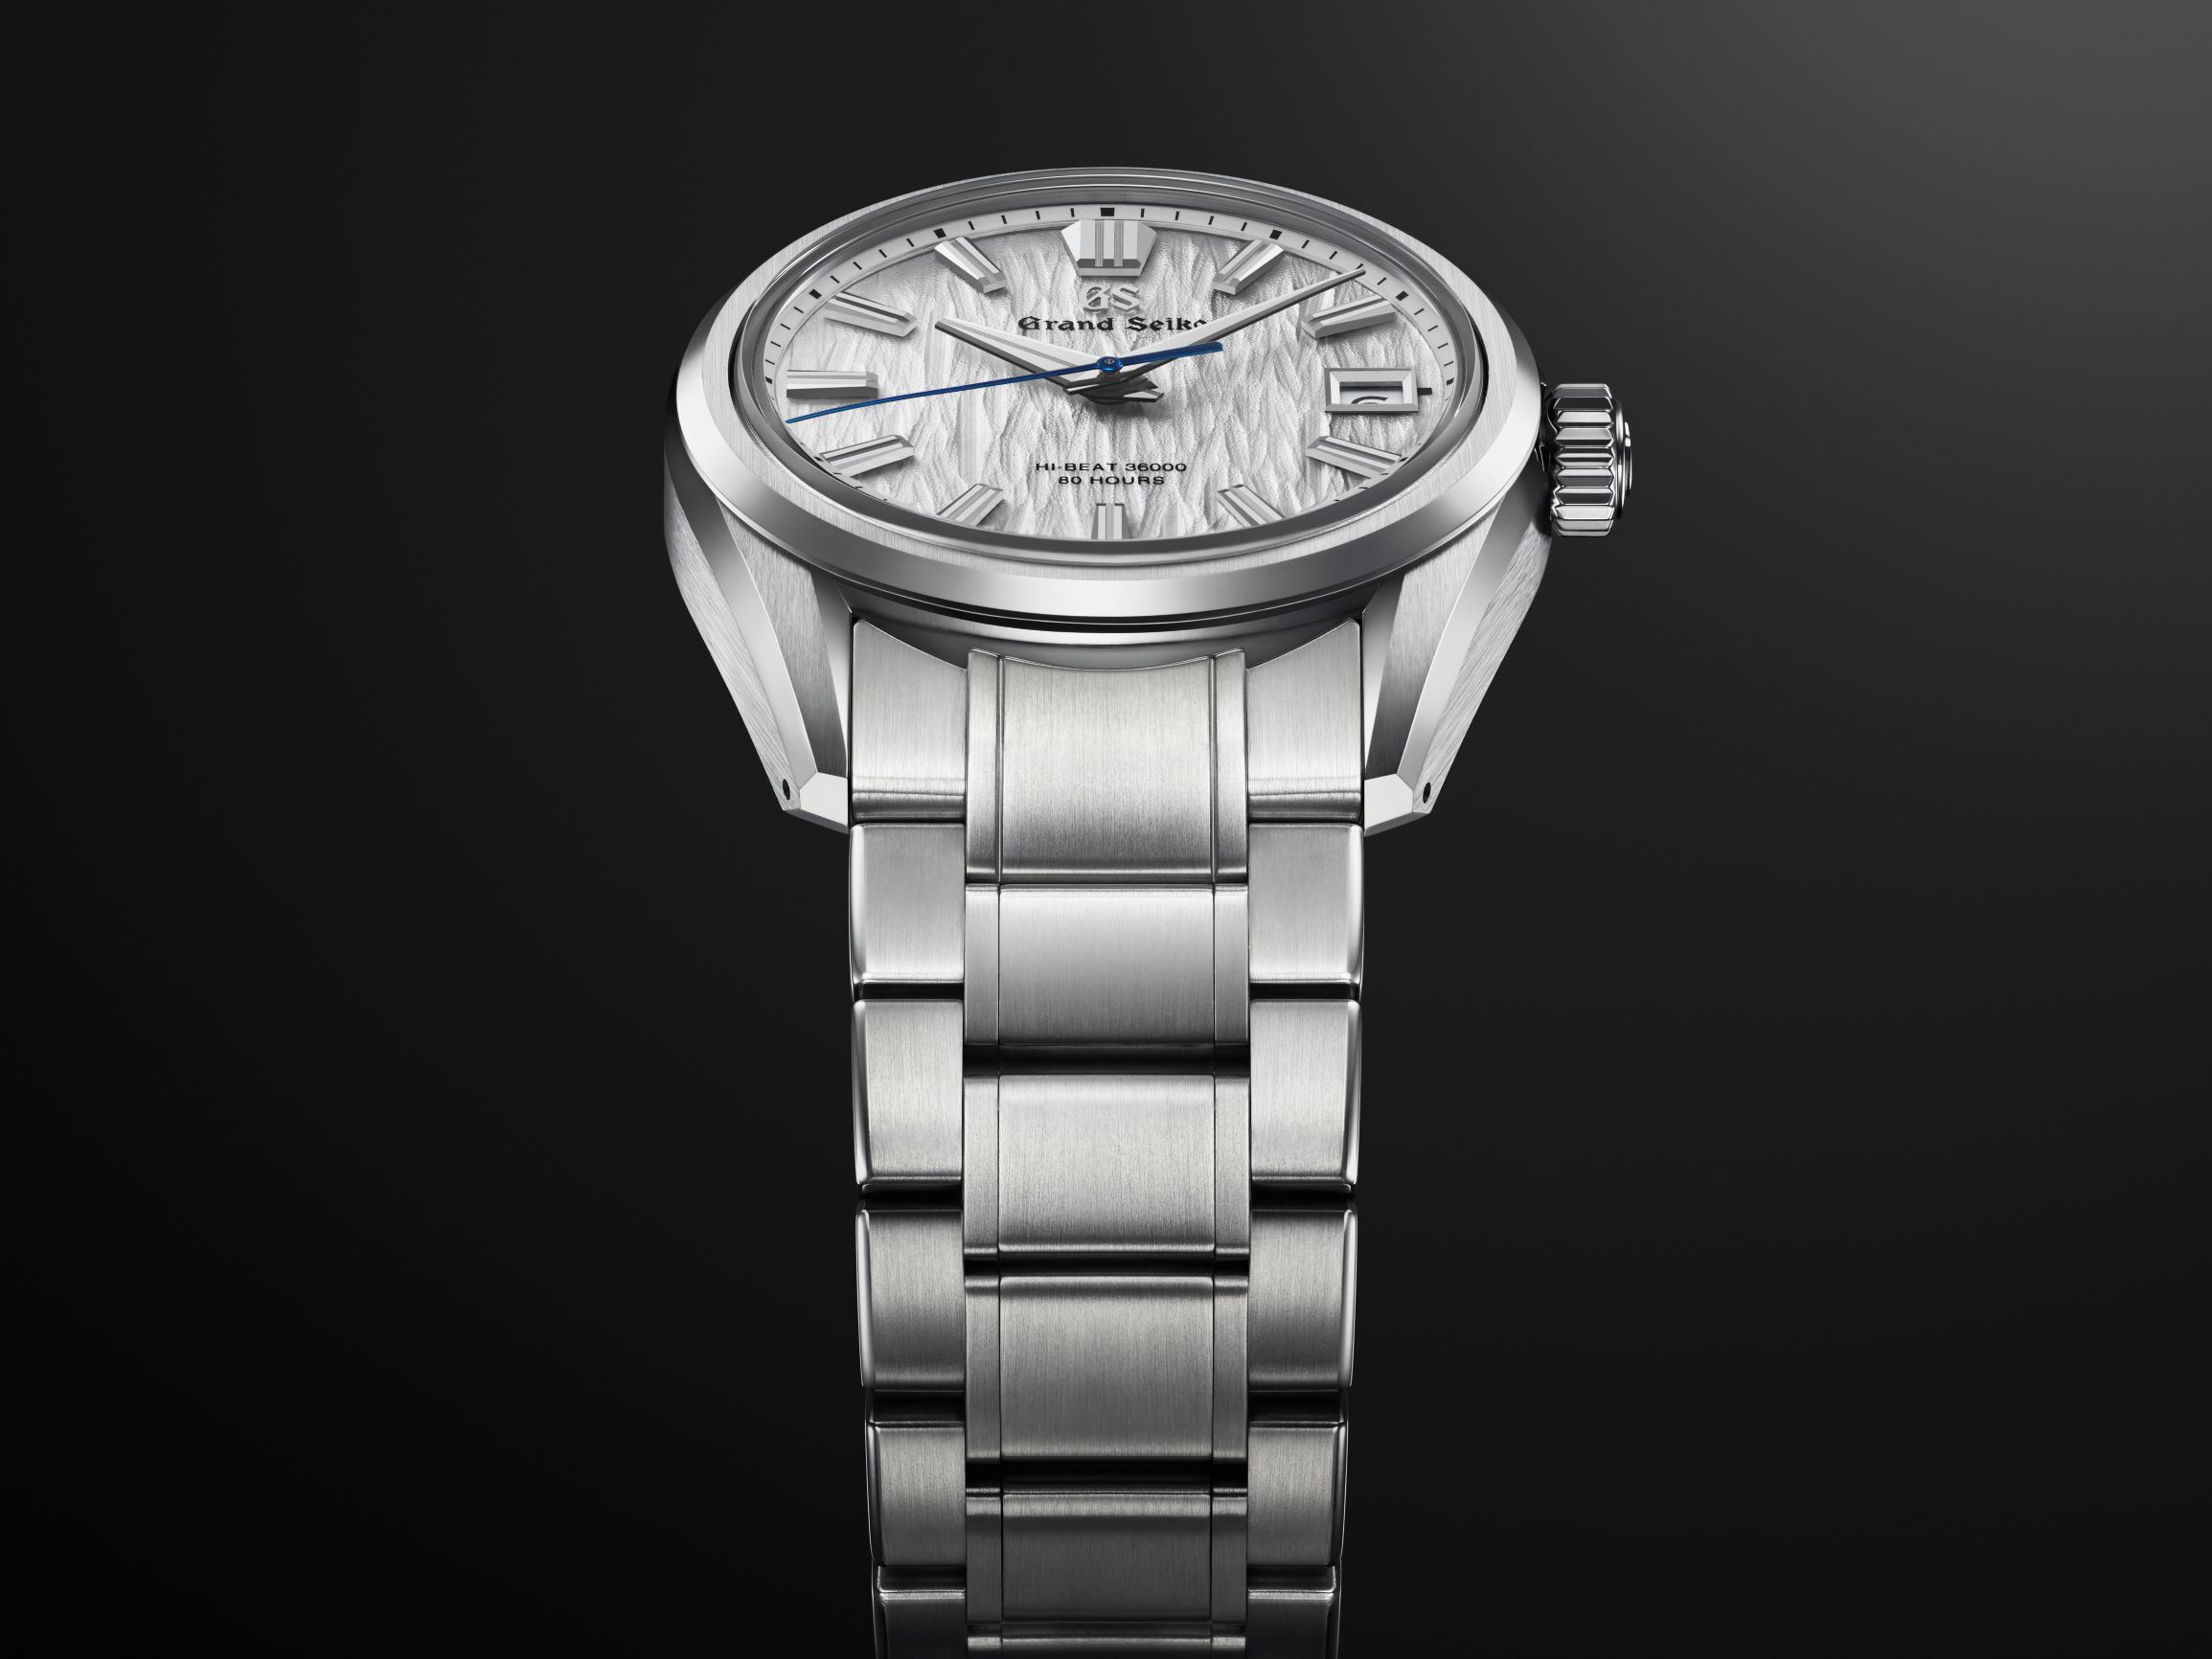 Grand Seiko Gets Wild with Tree-Inspired SLGH005 Watch - Maxim